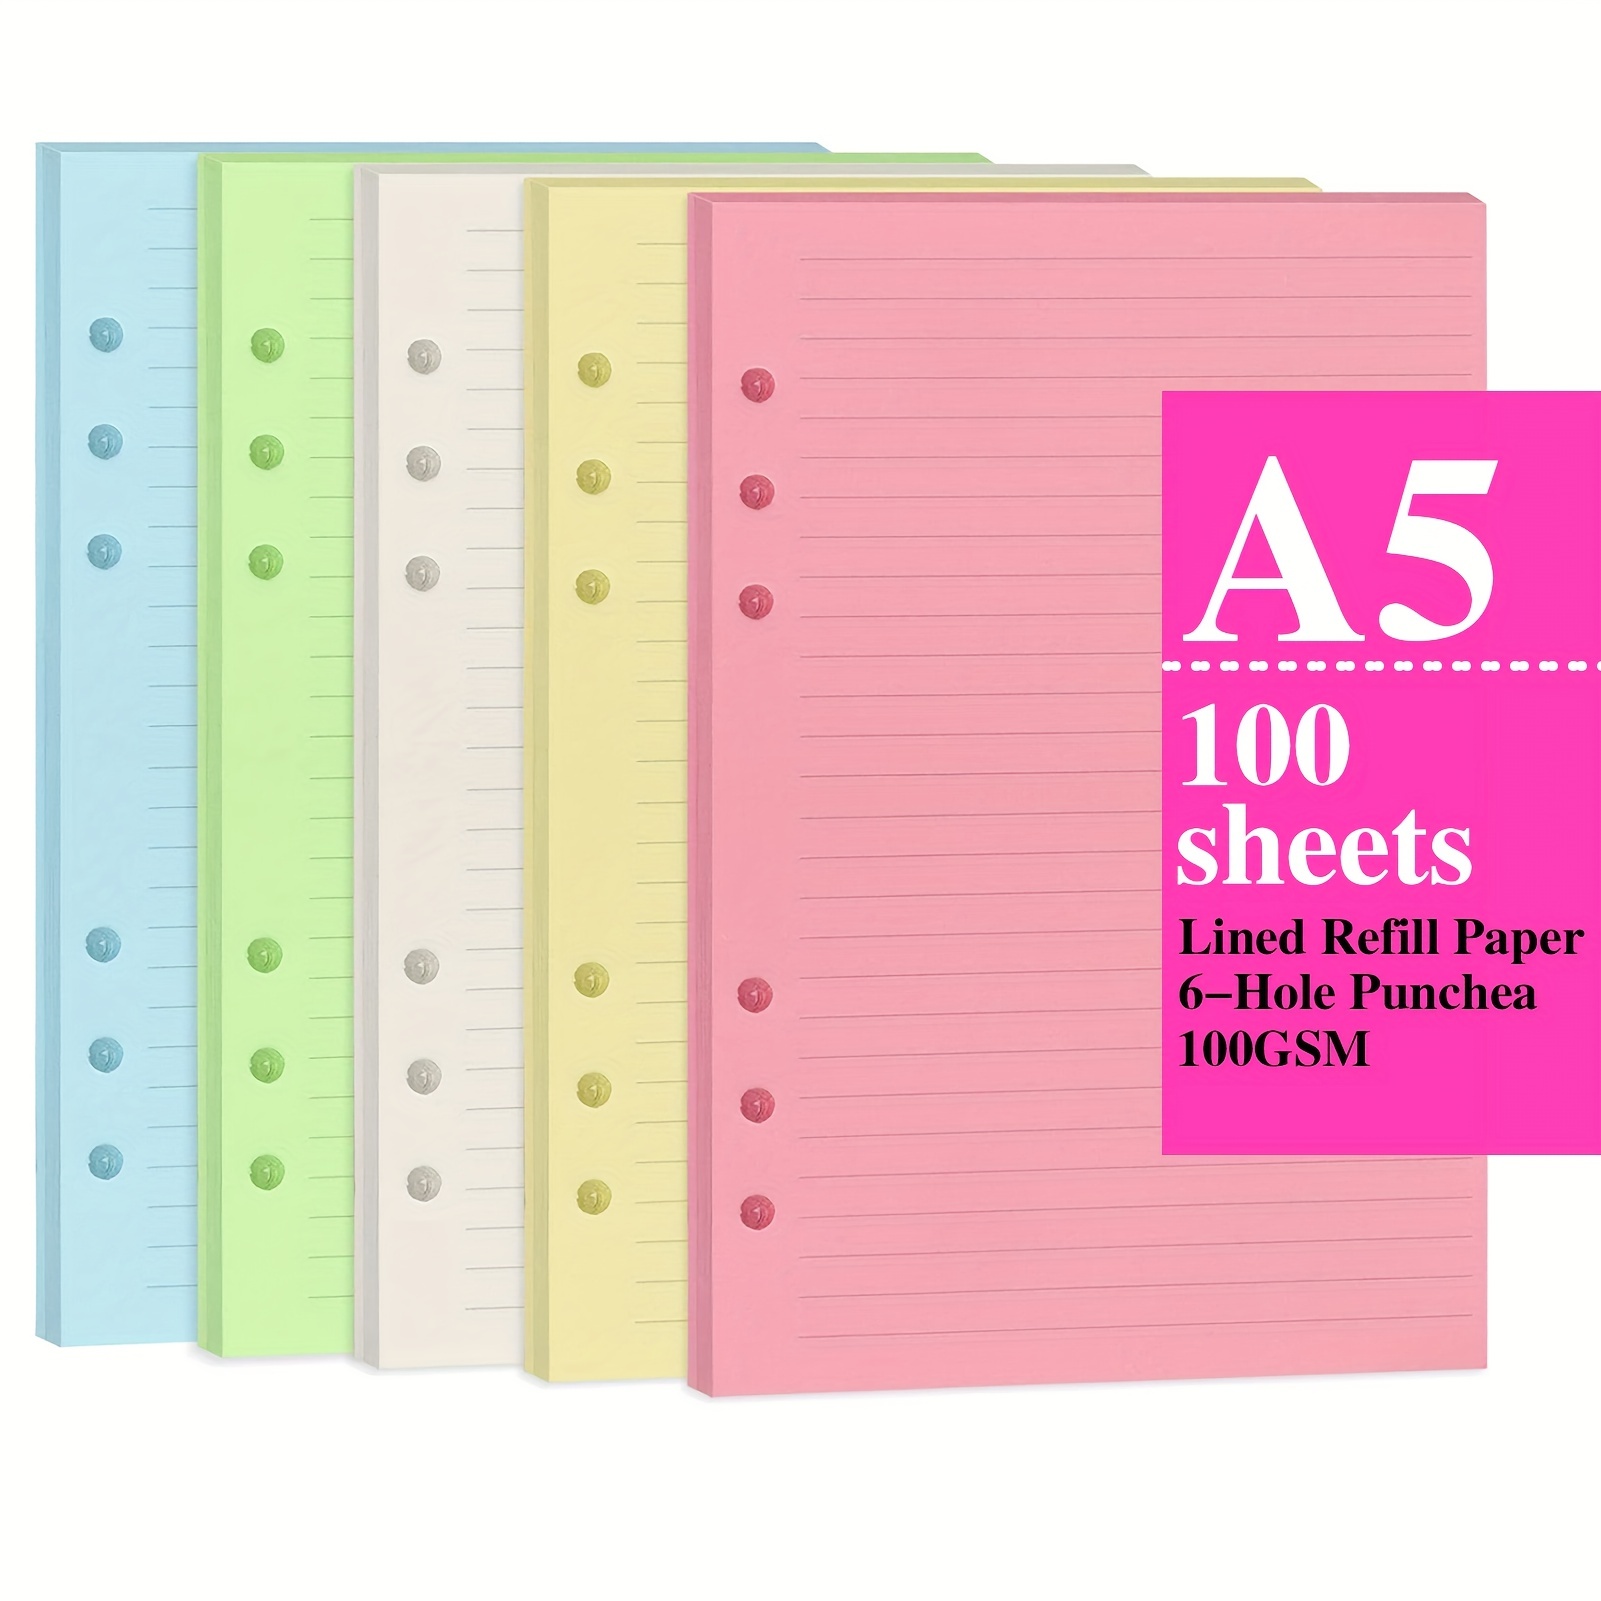 48 Pack Colorful Blank Books, Bulk, Mini Notebooks for Kids, Small Notepads Journals for Drawing, Writing (6 Colors, 4x4 in)